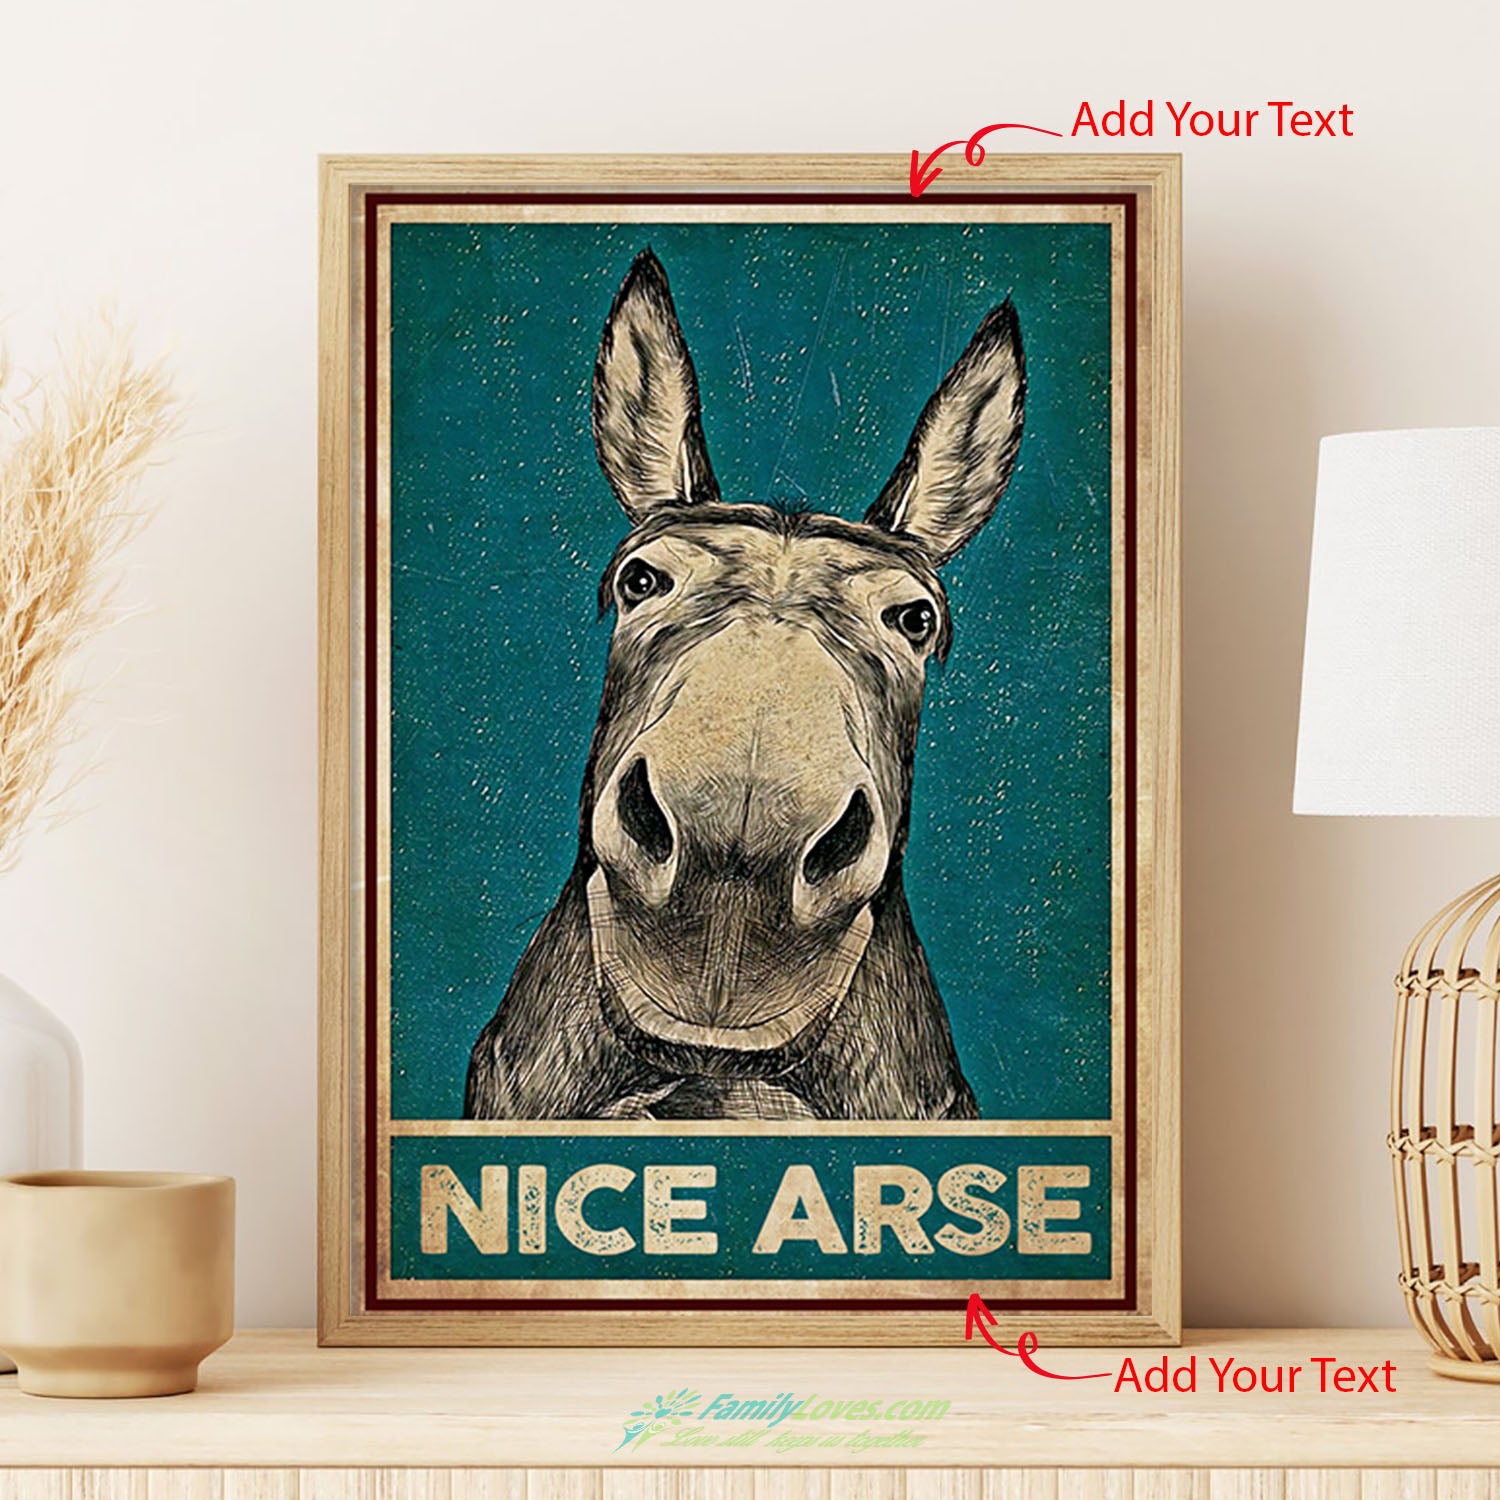 Nice Arse Framed Canvas Wall Art Poster 18X24 All Size 1